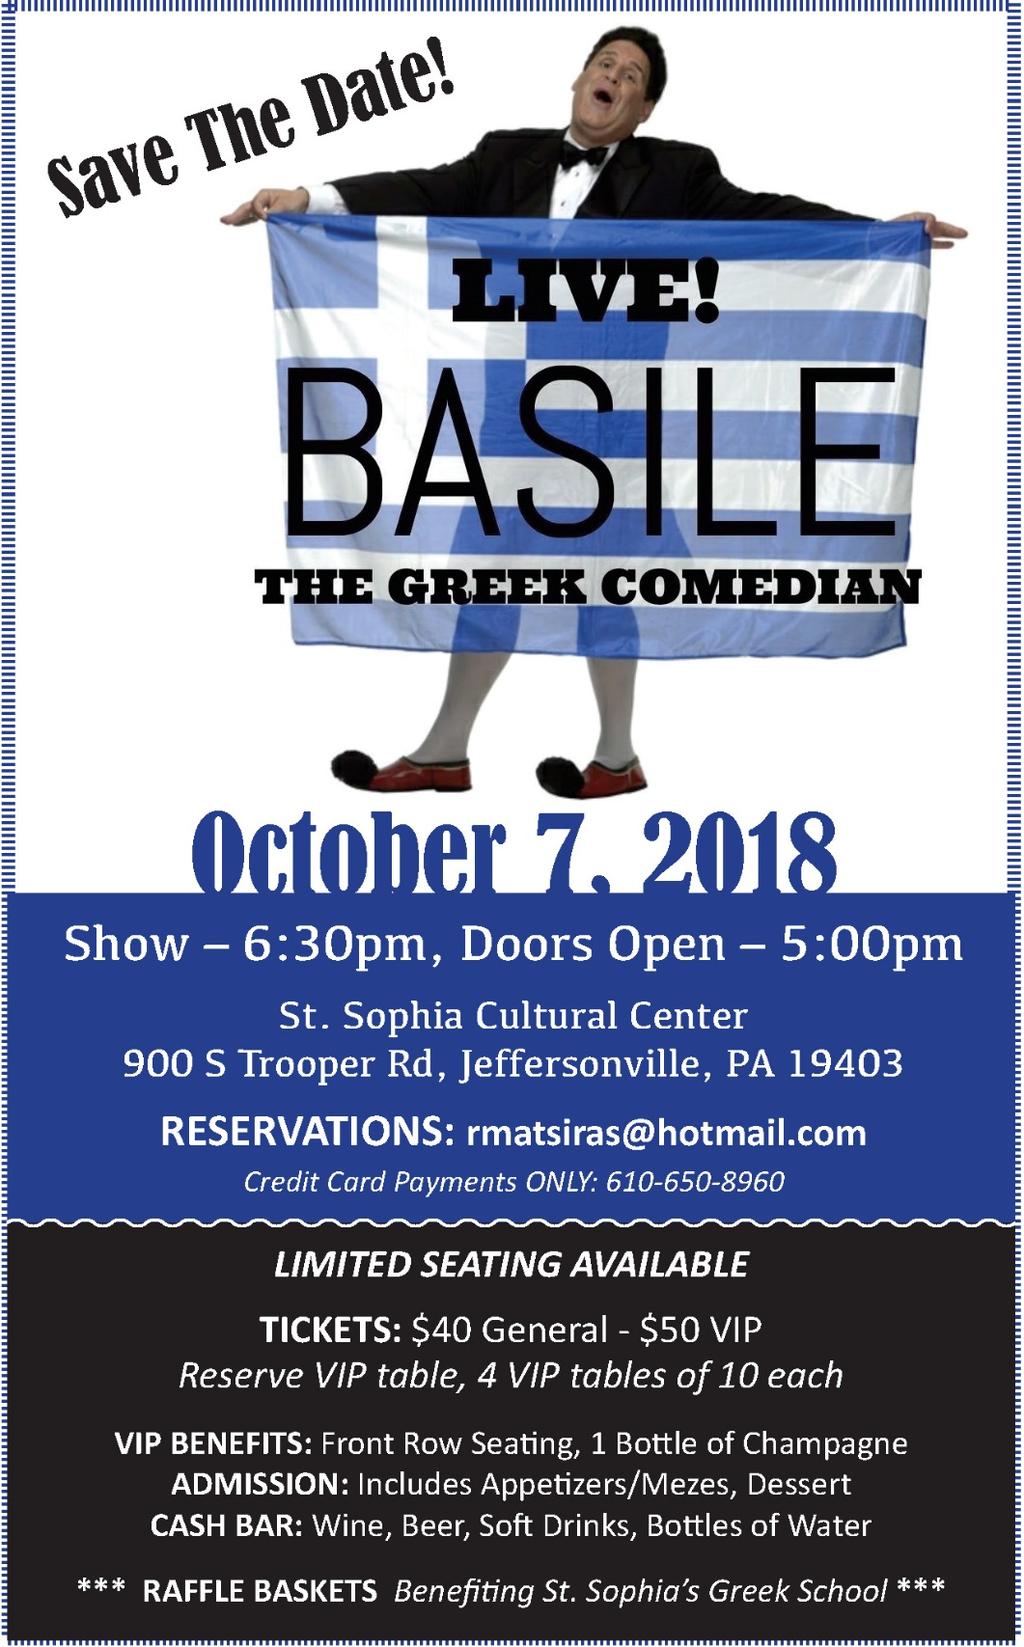 Basile in Concert: One week to go buy your tickets NOW!!! Sunday, October the 7th @ 5:00 pm! This event will benefit the Greek School program of St. Sophia Church!